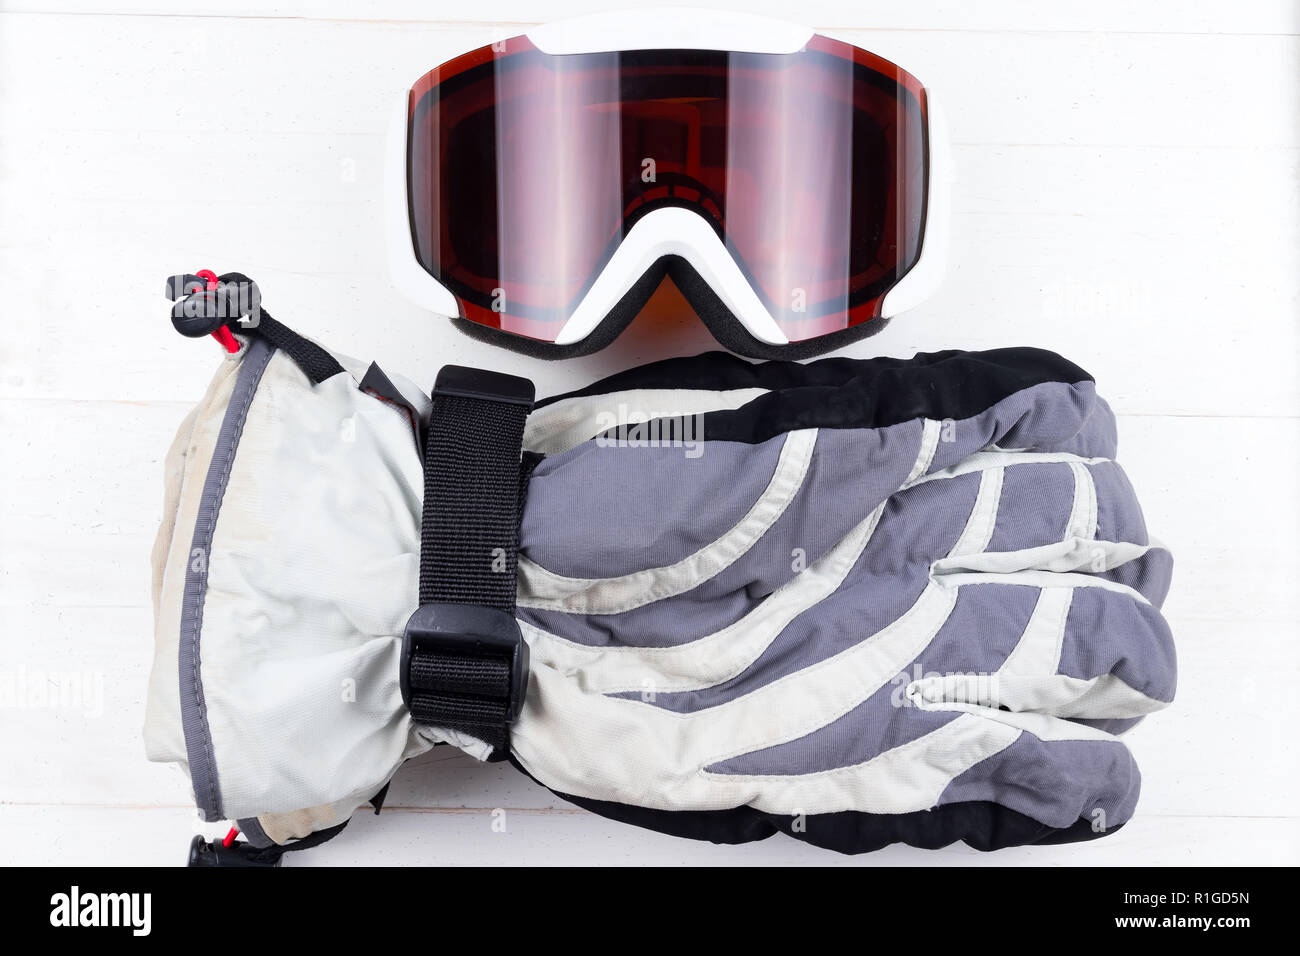 Winter gloves and goggles on white natural wooden table background. Concept of skiing or snowboarding. Flat lay top view. Stock Photo